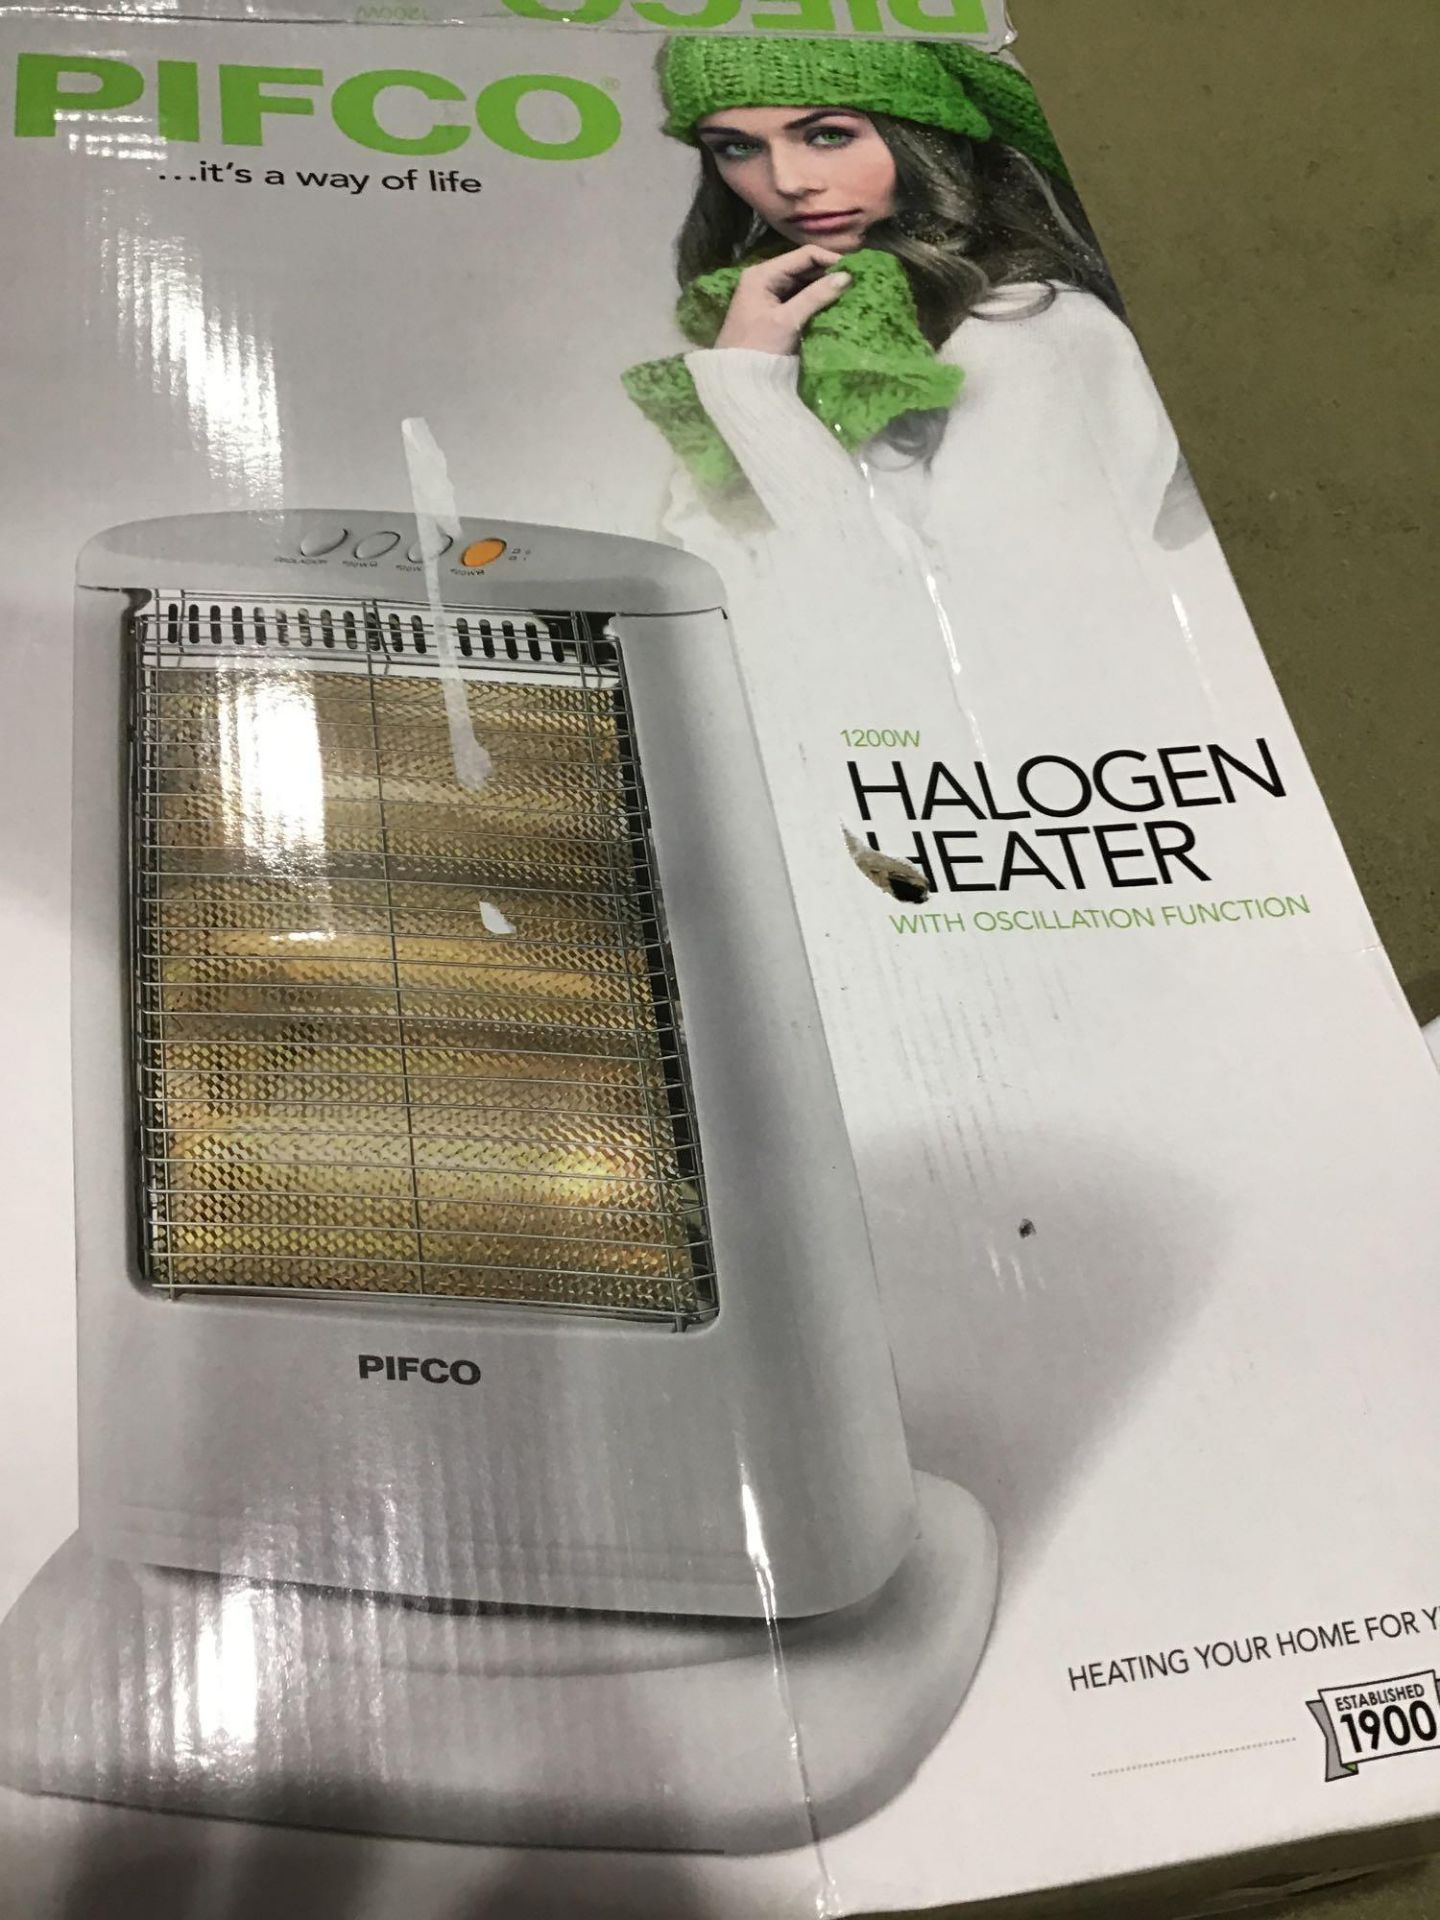 Pifco Portable Halogen Heater with 3 Heat Settings, Safety Cut Off Switch, 70 Degree £24.99 RRP - Image 3 of 4